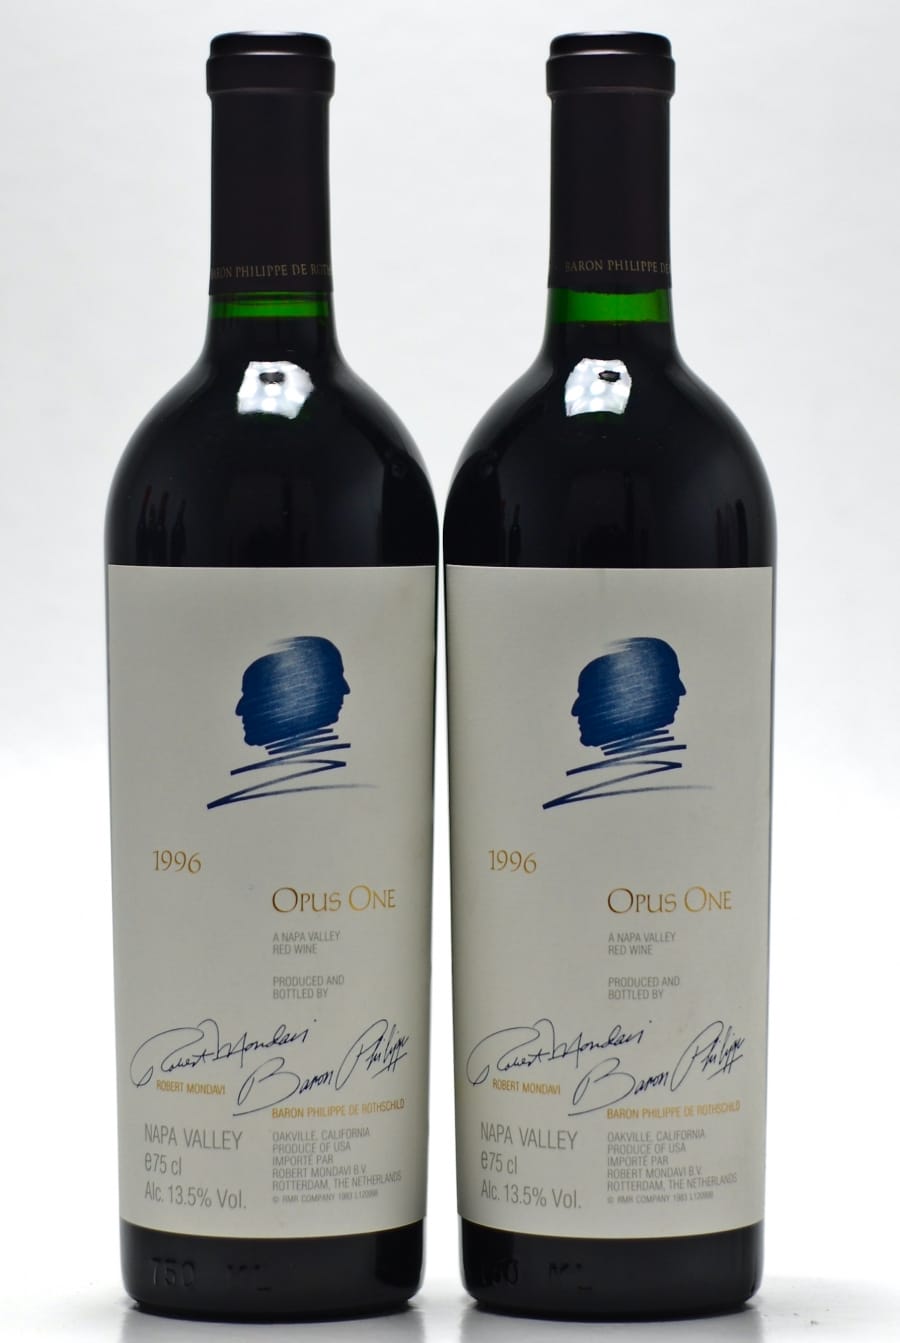 opus one 2005 red wine from california